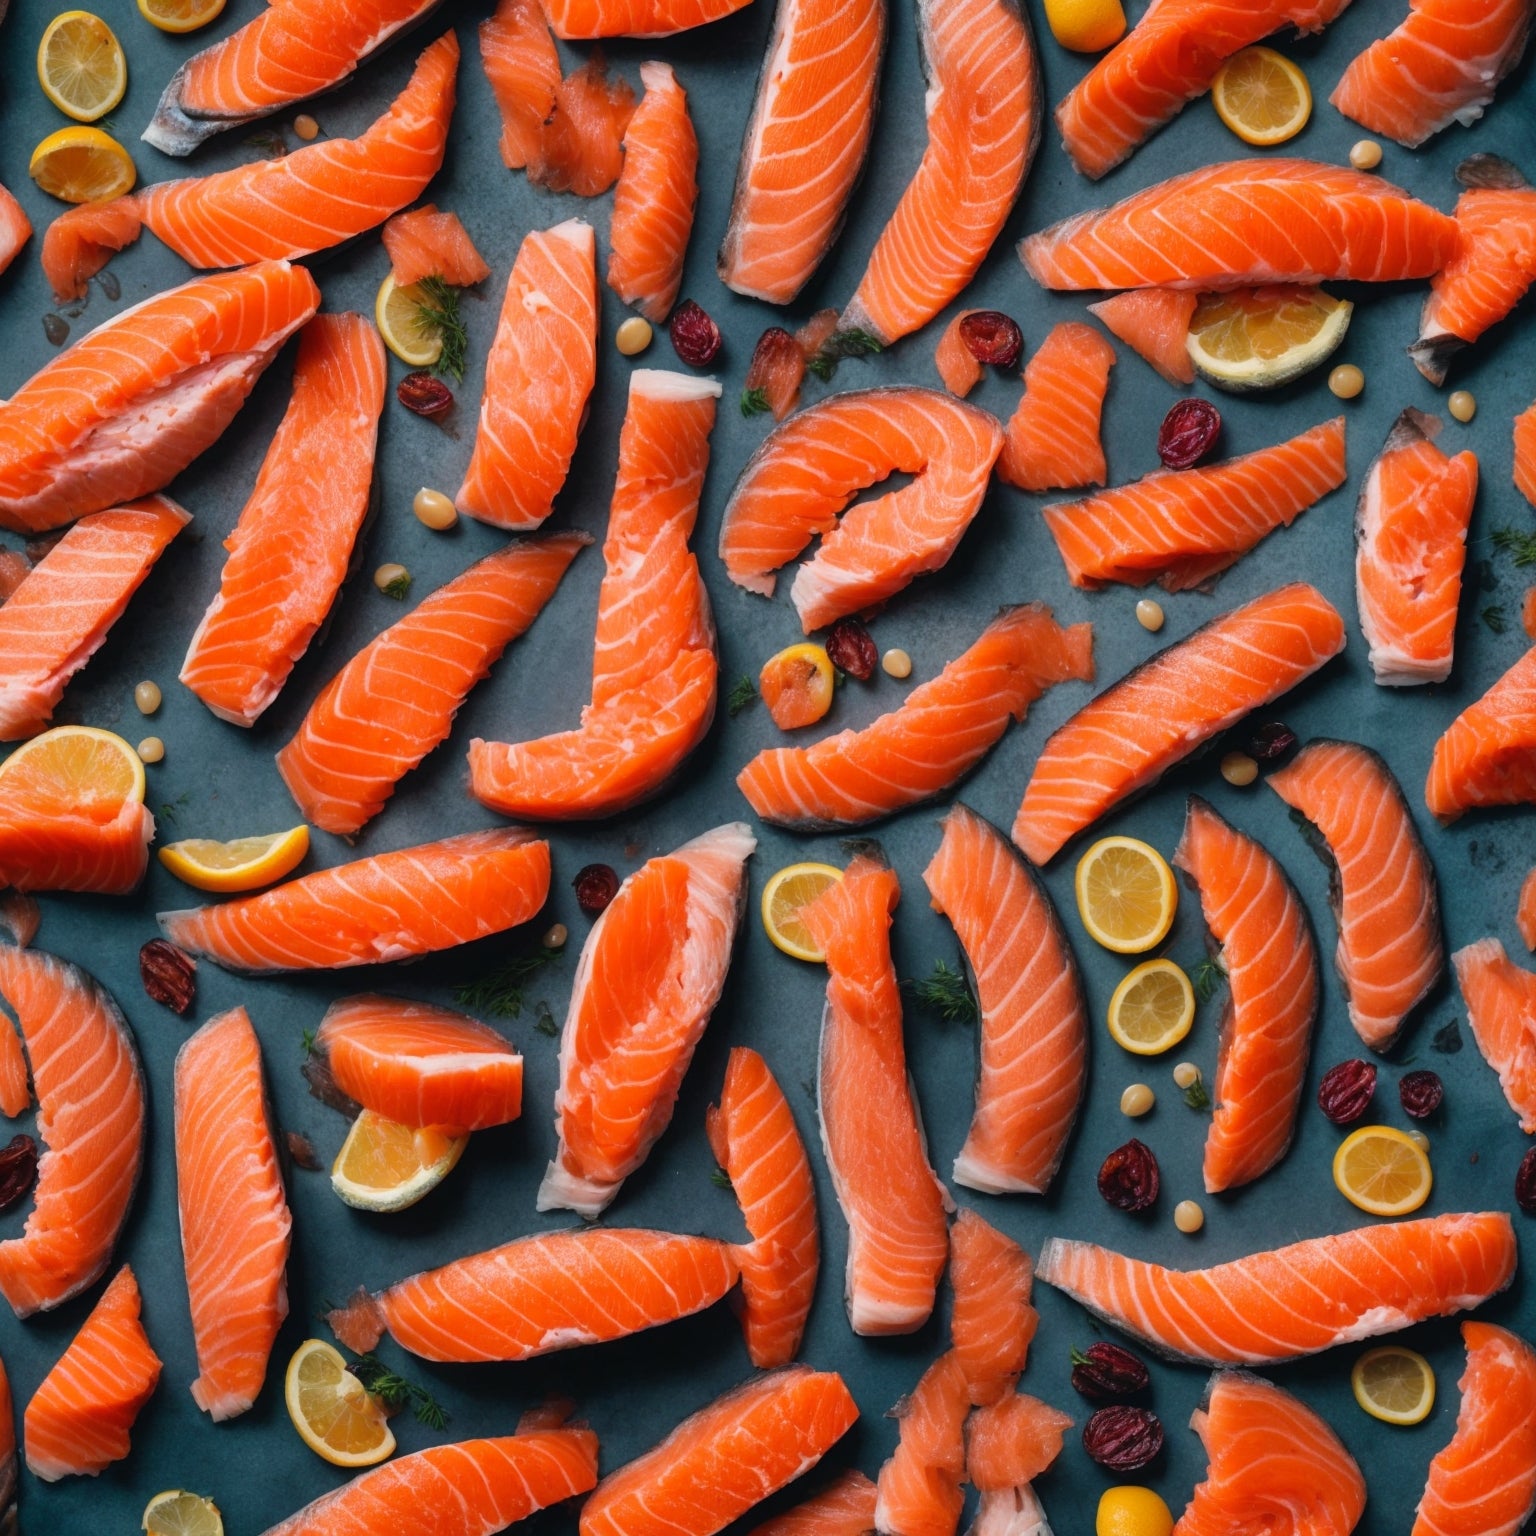 Frequently Asked Questions About Salmon Lox: Your Guide to All Things Lox